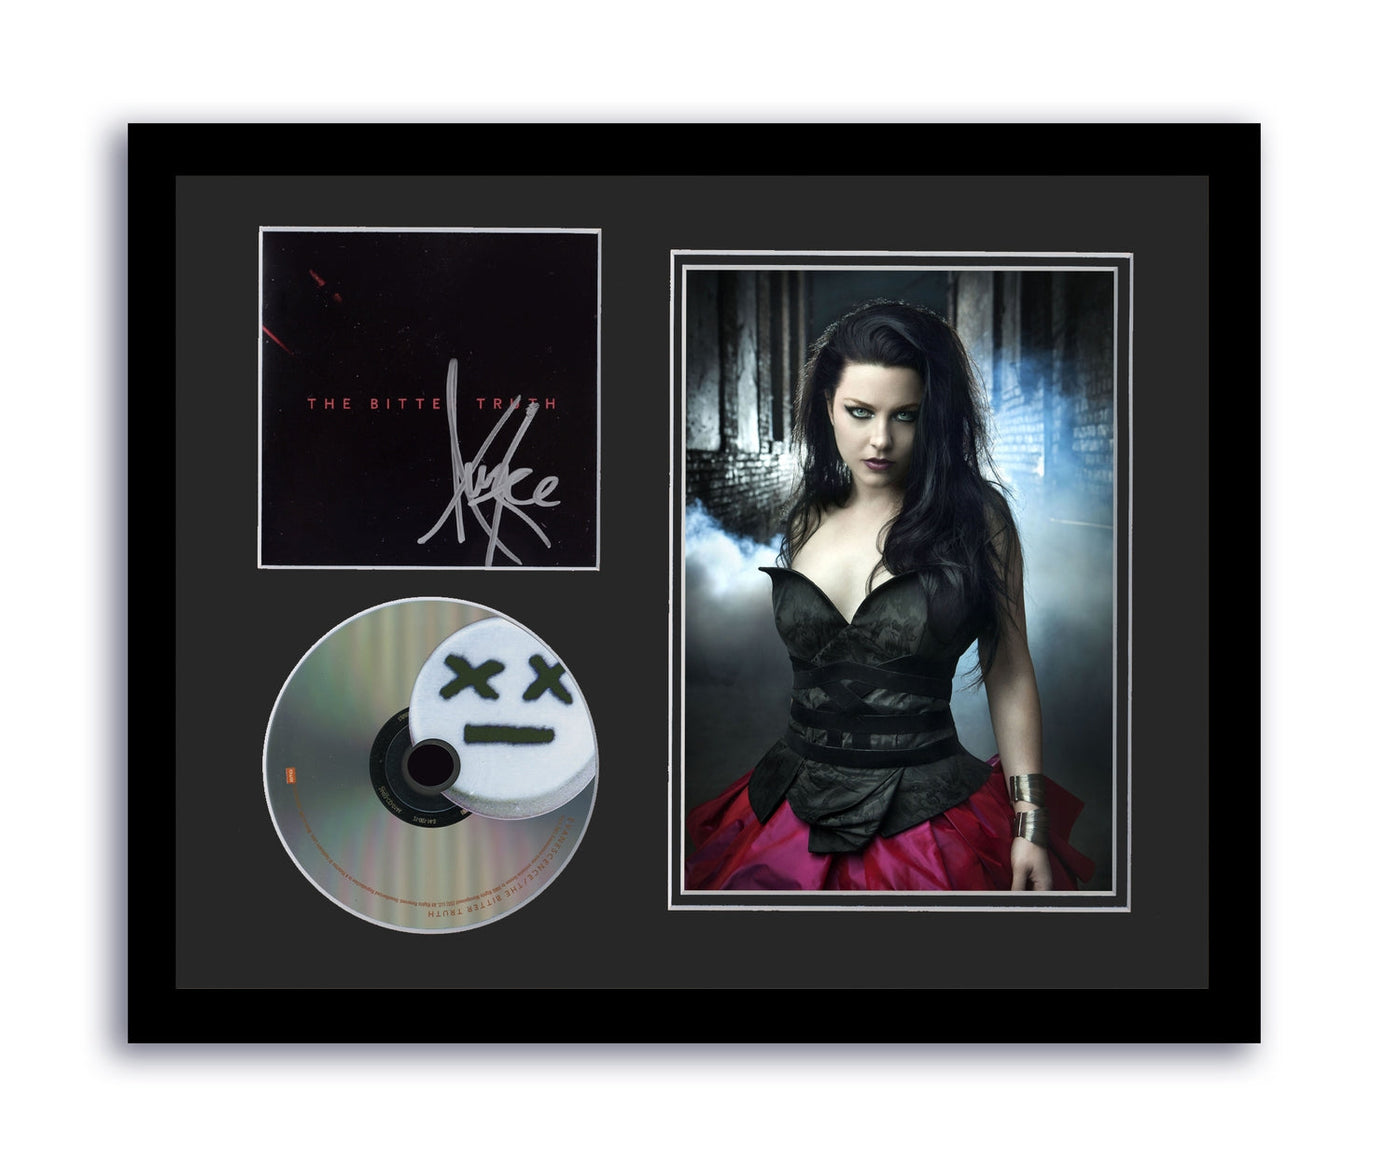 Evanescence Amy Lee Autographed 11x14 Custom Framed CD Photo Bitter Truth Signed ACOA 7